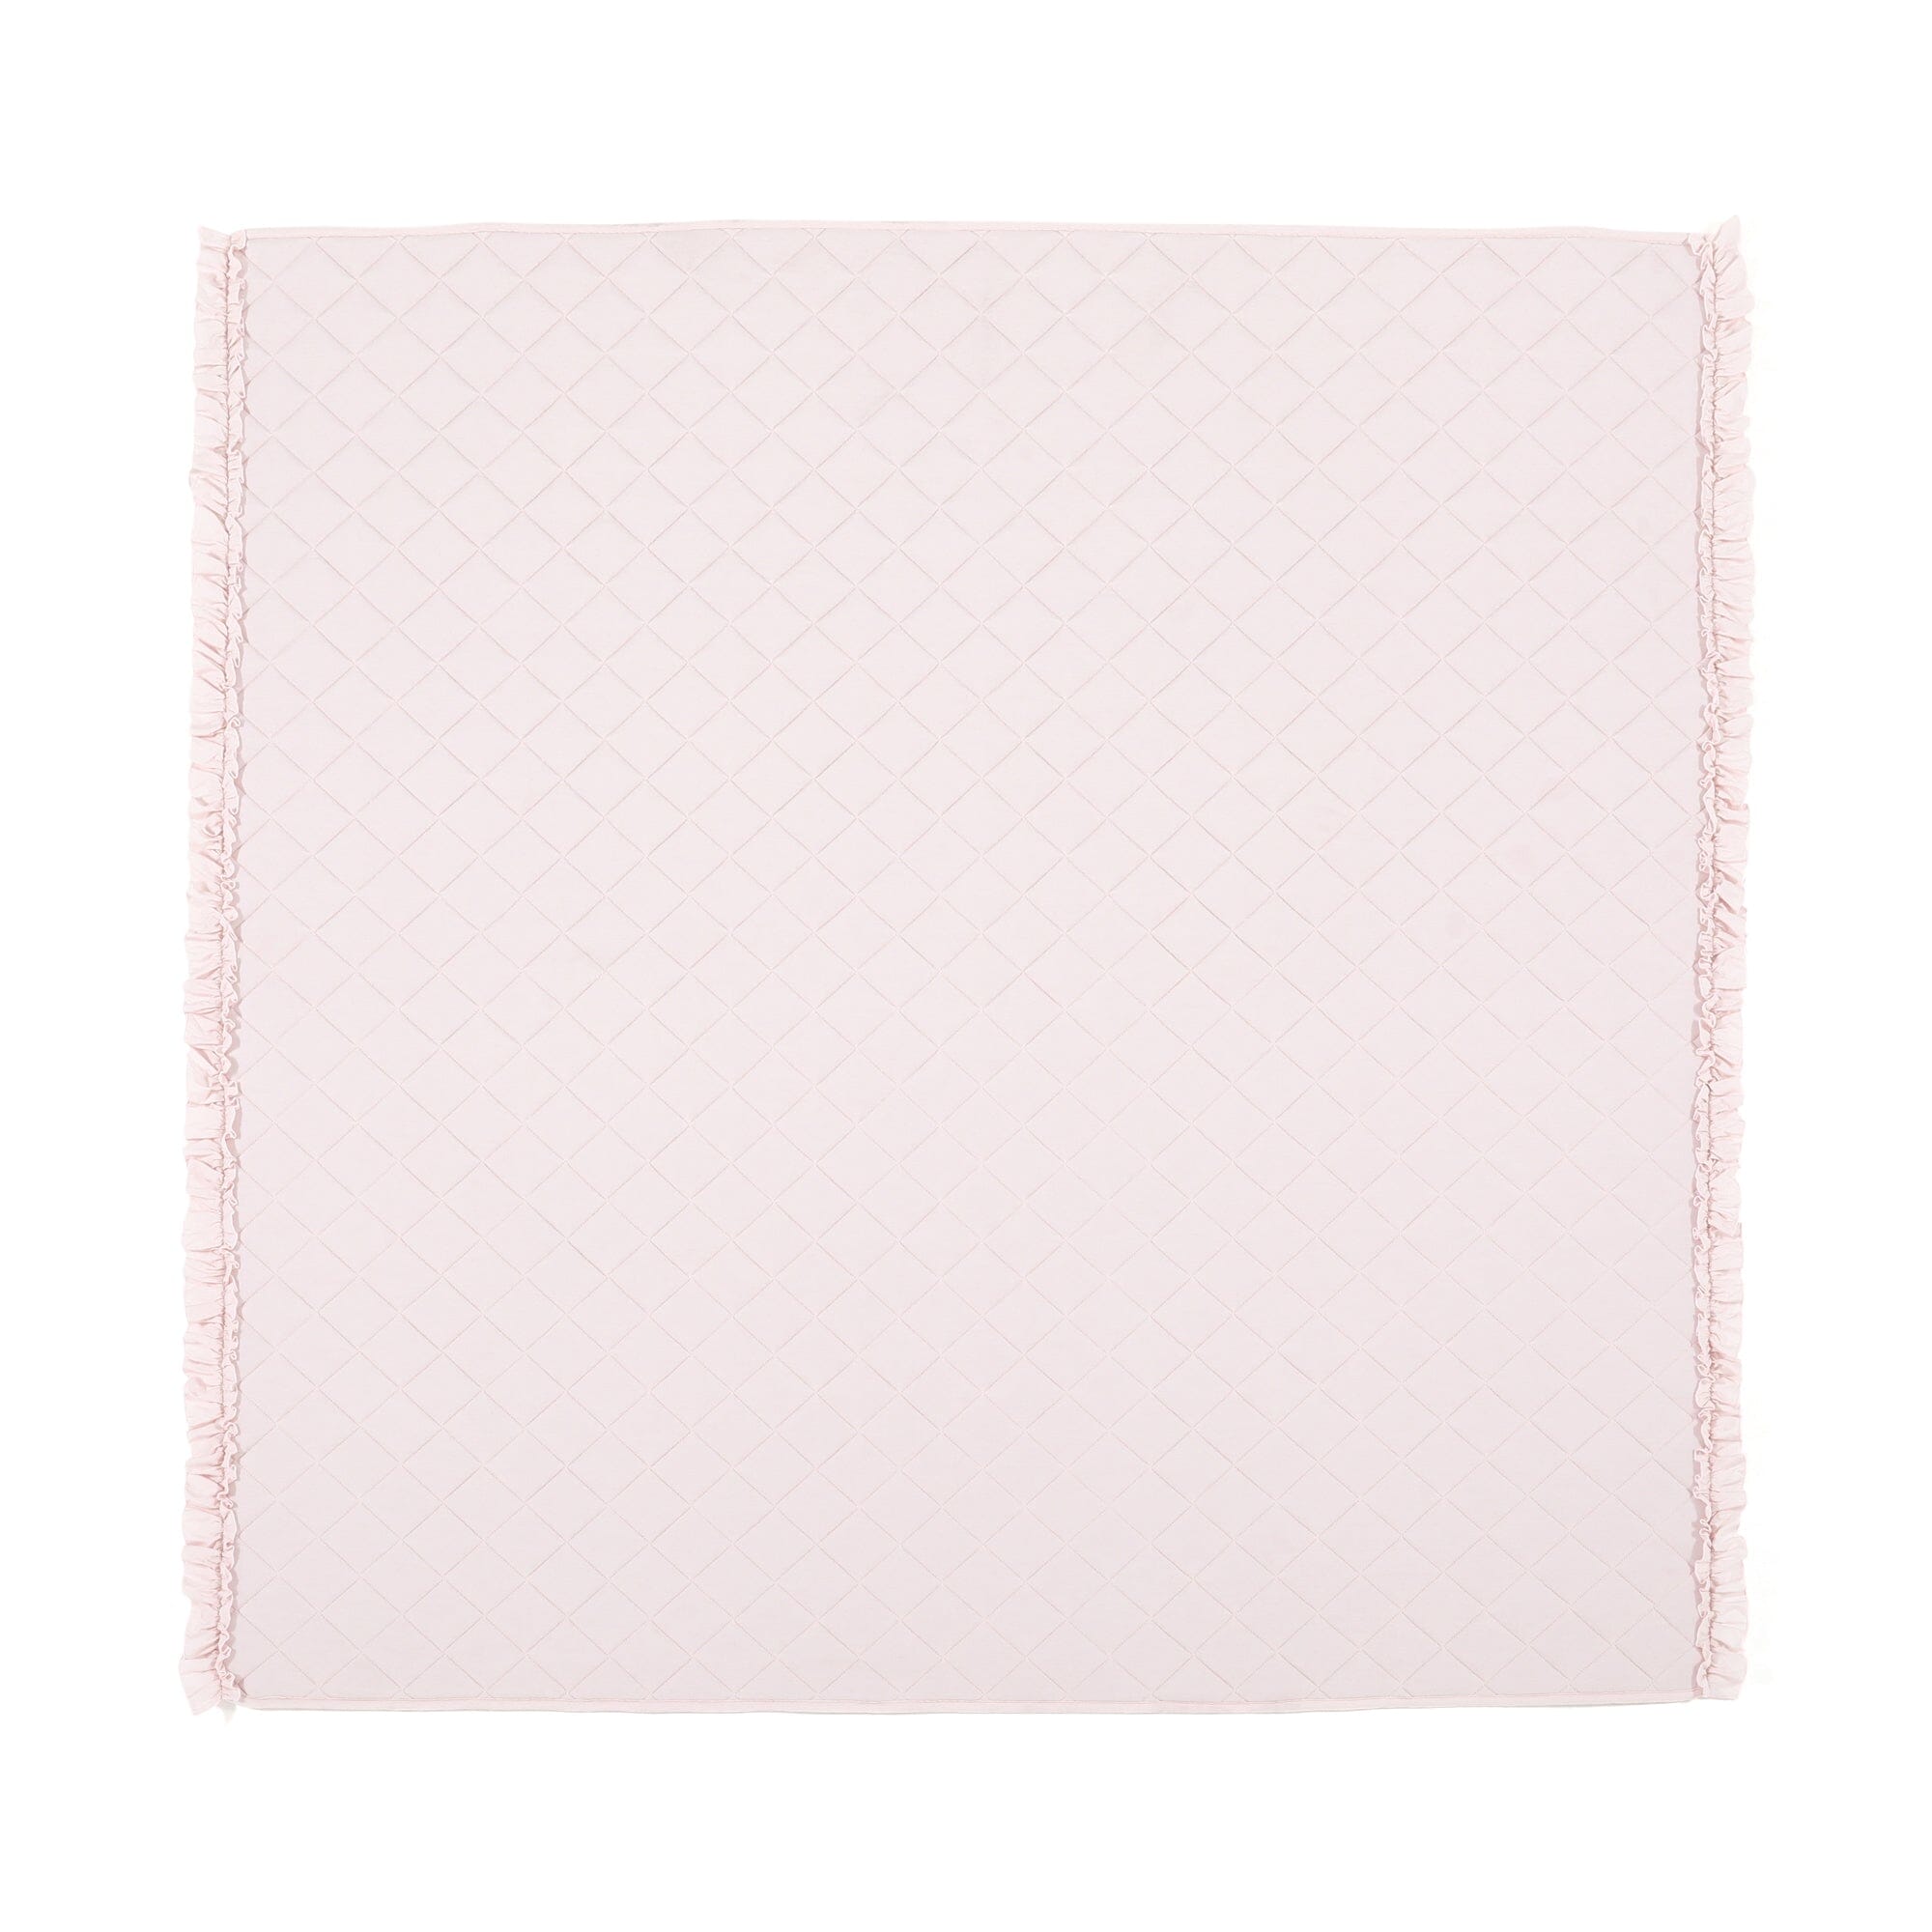 Cool Quilt Rug Frill L 1850 X 1850 Pink